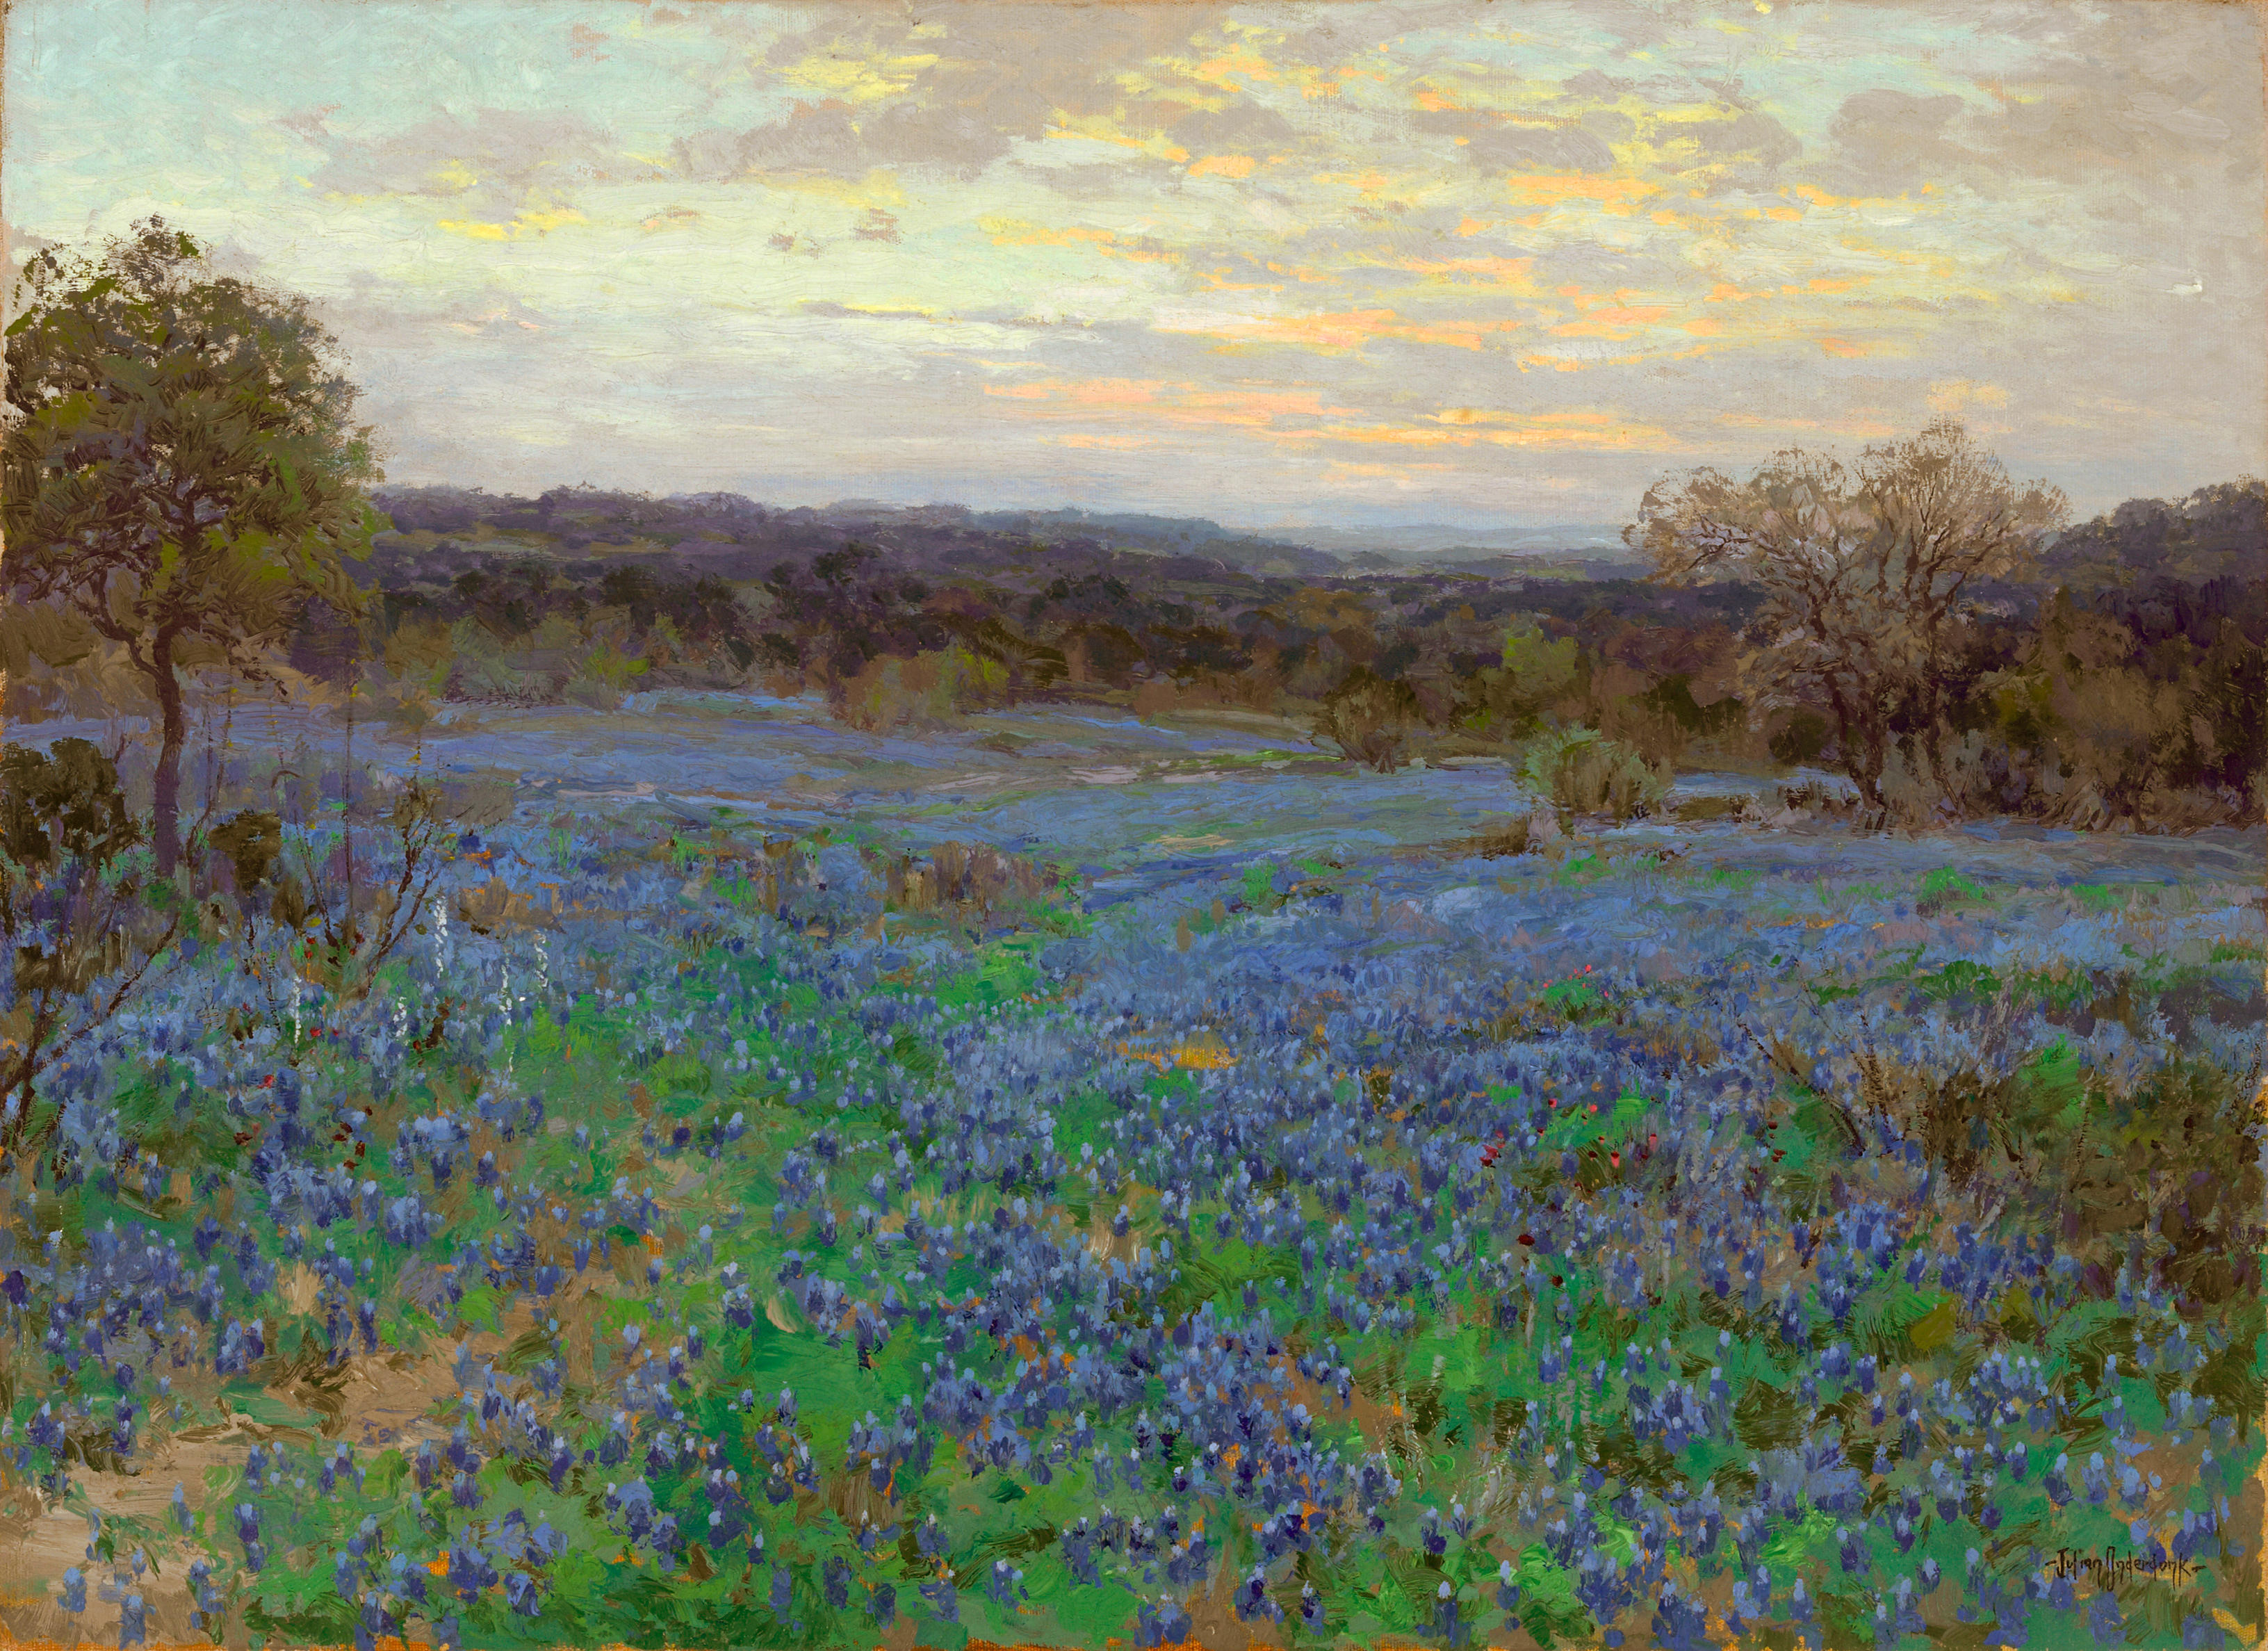 Julian Onderdonk hand-painted oil painting reproduction,A field of Texas bluebonnets in the Texas Hill Country springtime scene The Quarry 